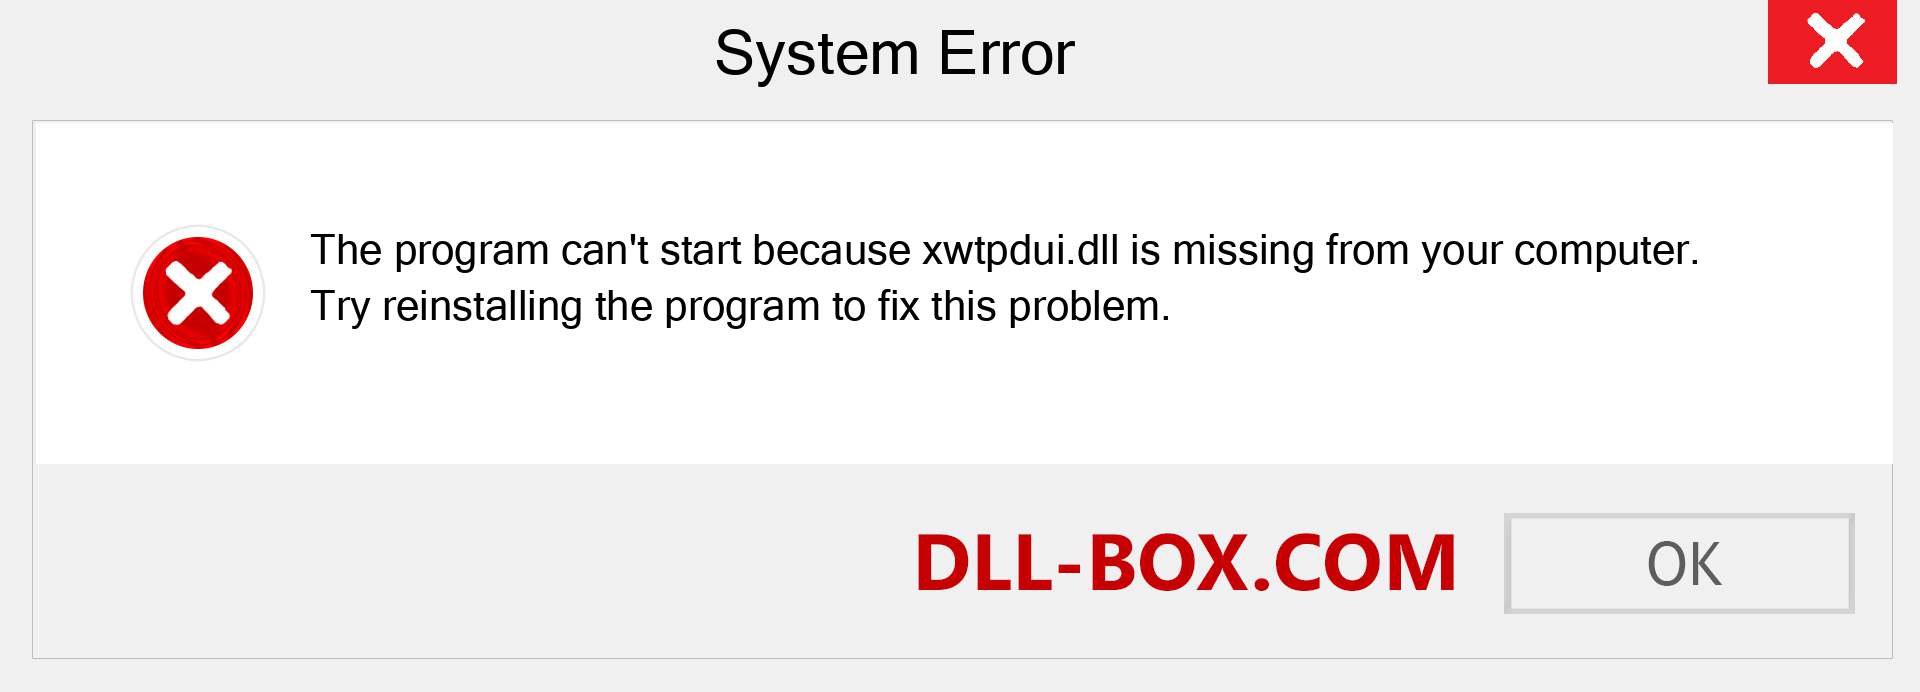  xwtpdui.dll file is missing?. Download for Windows 7, 8, 10 - Fix  xwtpdui dll Missing Error on Windows, photos, images